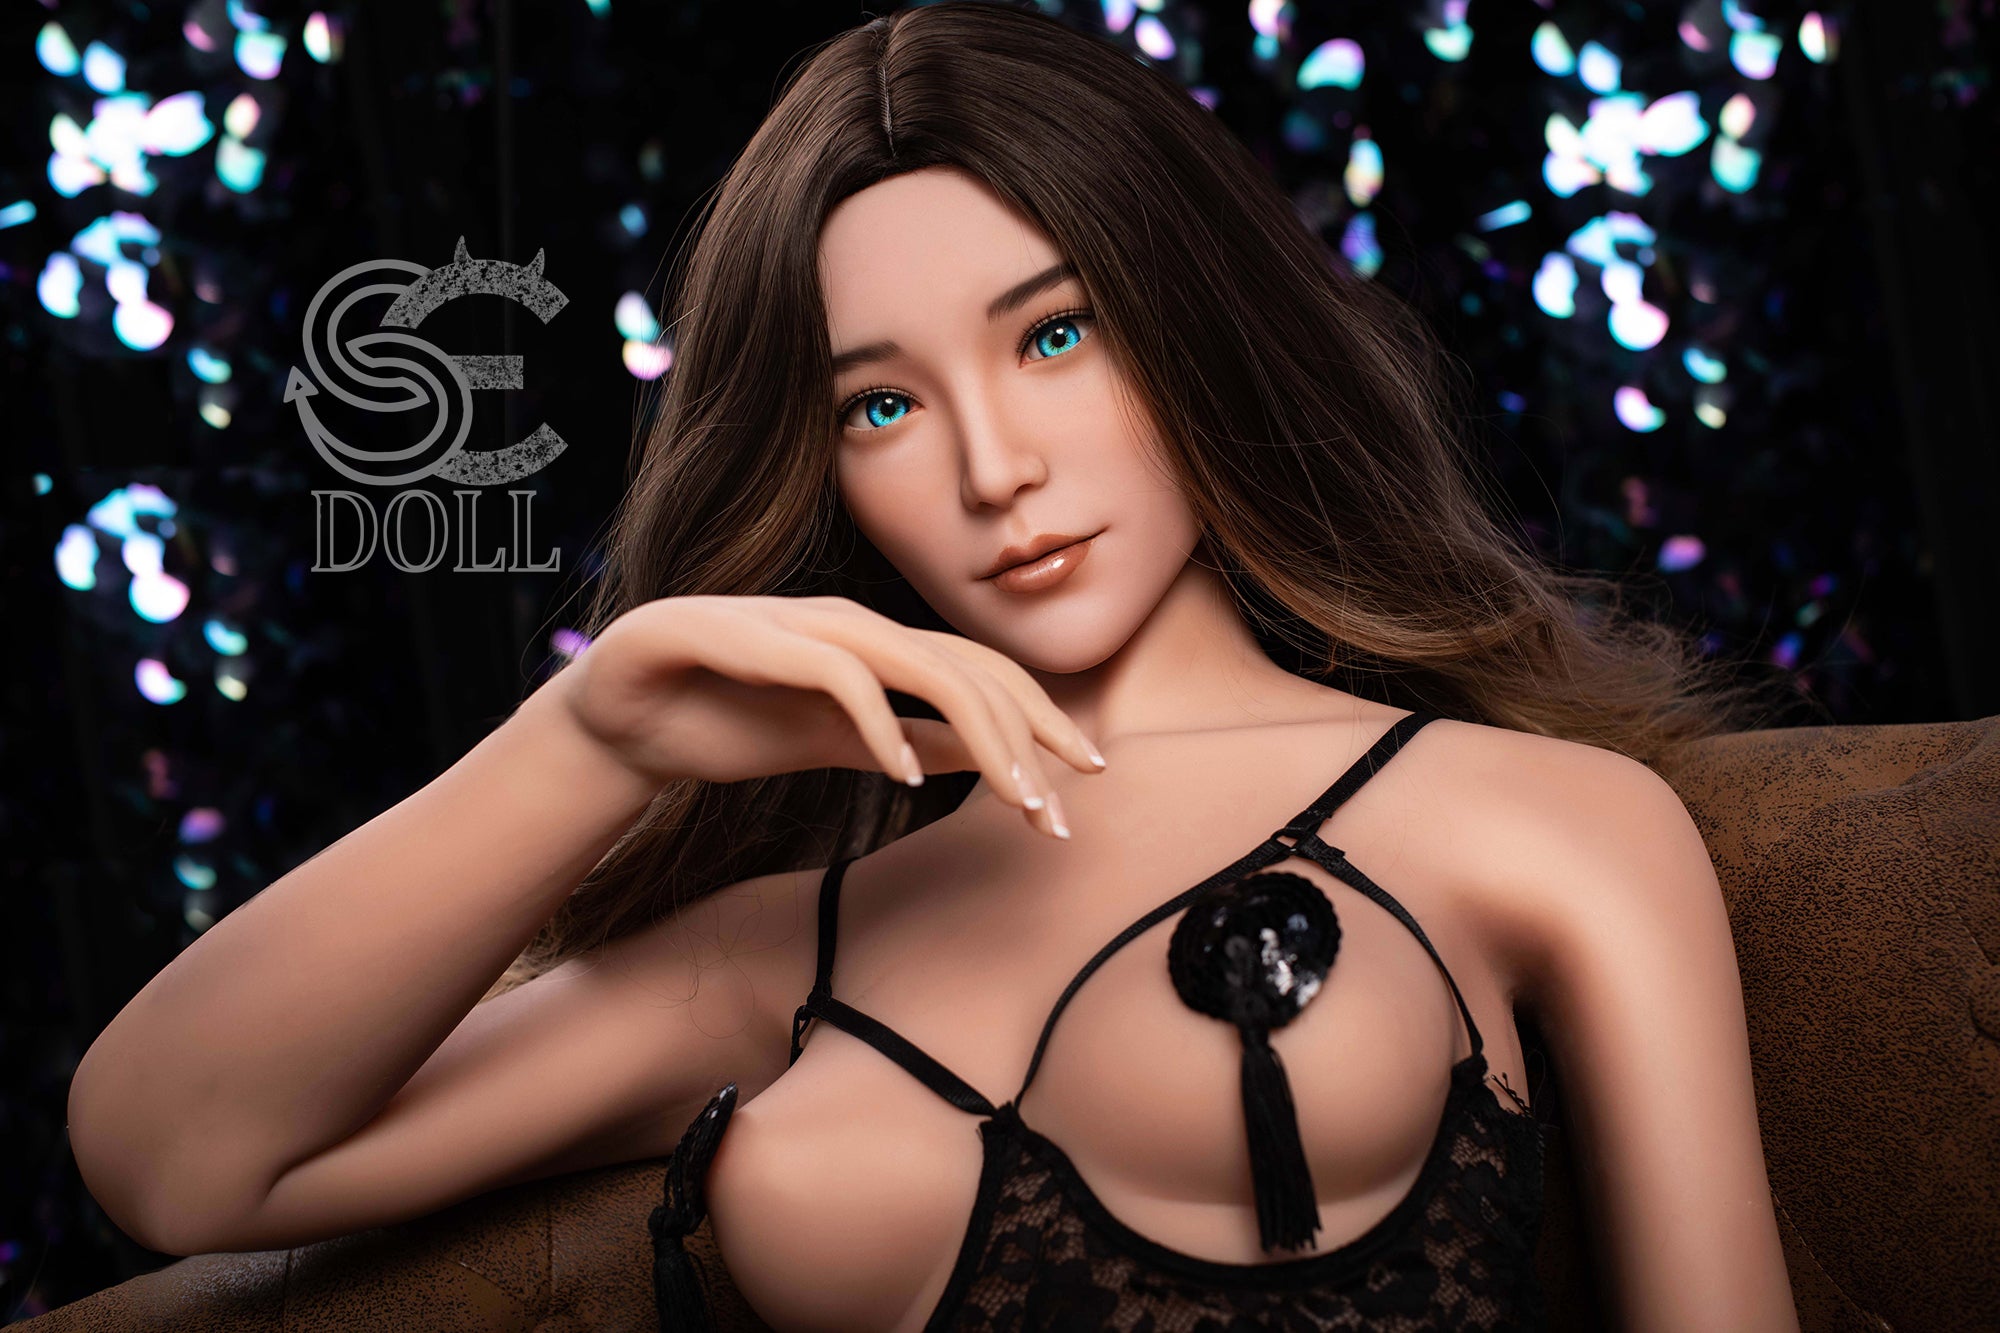 SEDOLL 166 cm C TPE - Quentina | Buy Sex Dolls at DOLLS ACTUALLY